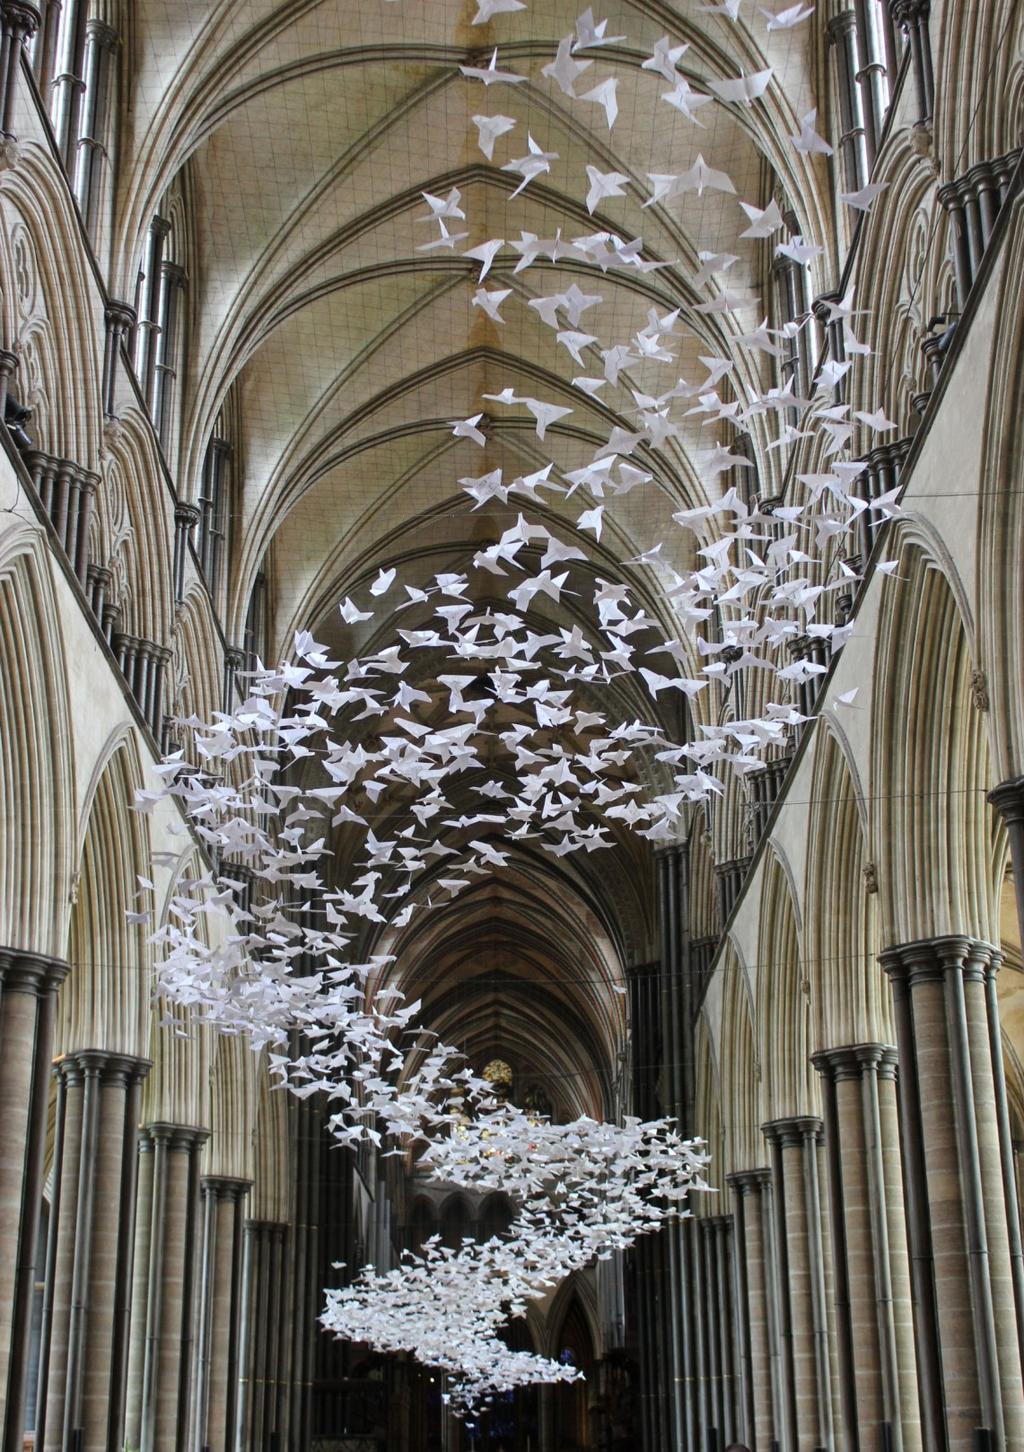 Salisbury A City of Doves If you haven t already visited Salisbury Cathedral since the opening of the art installation Les Colombes I do urge you to go.